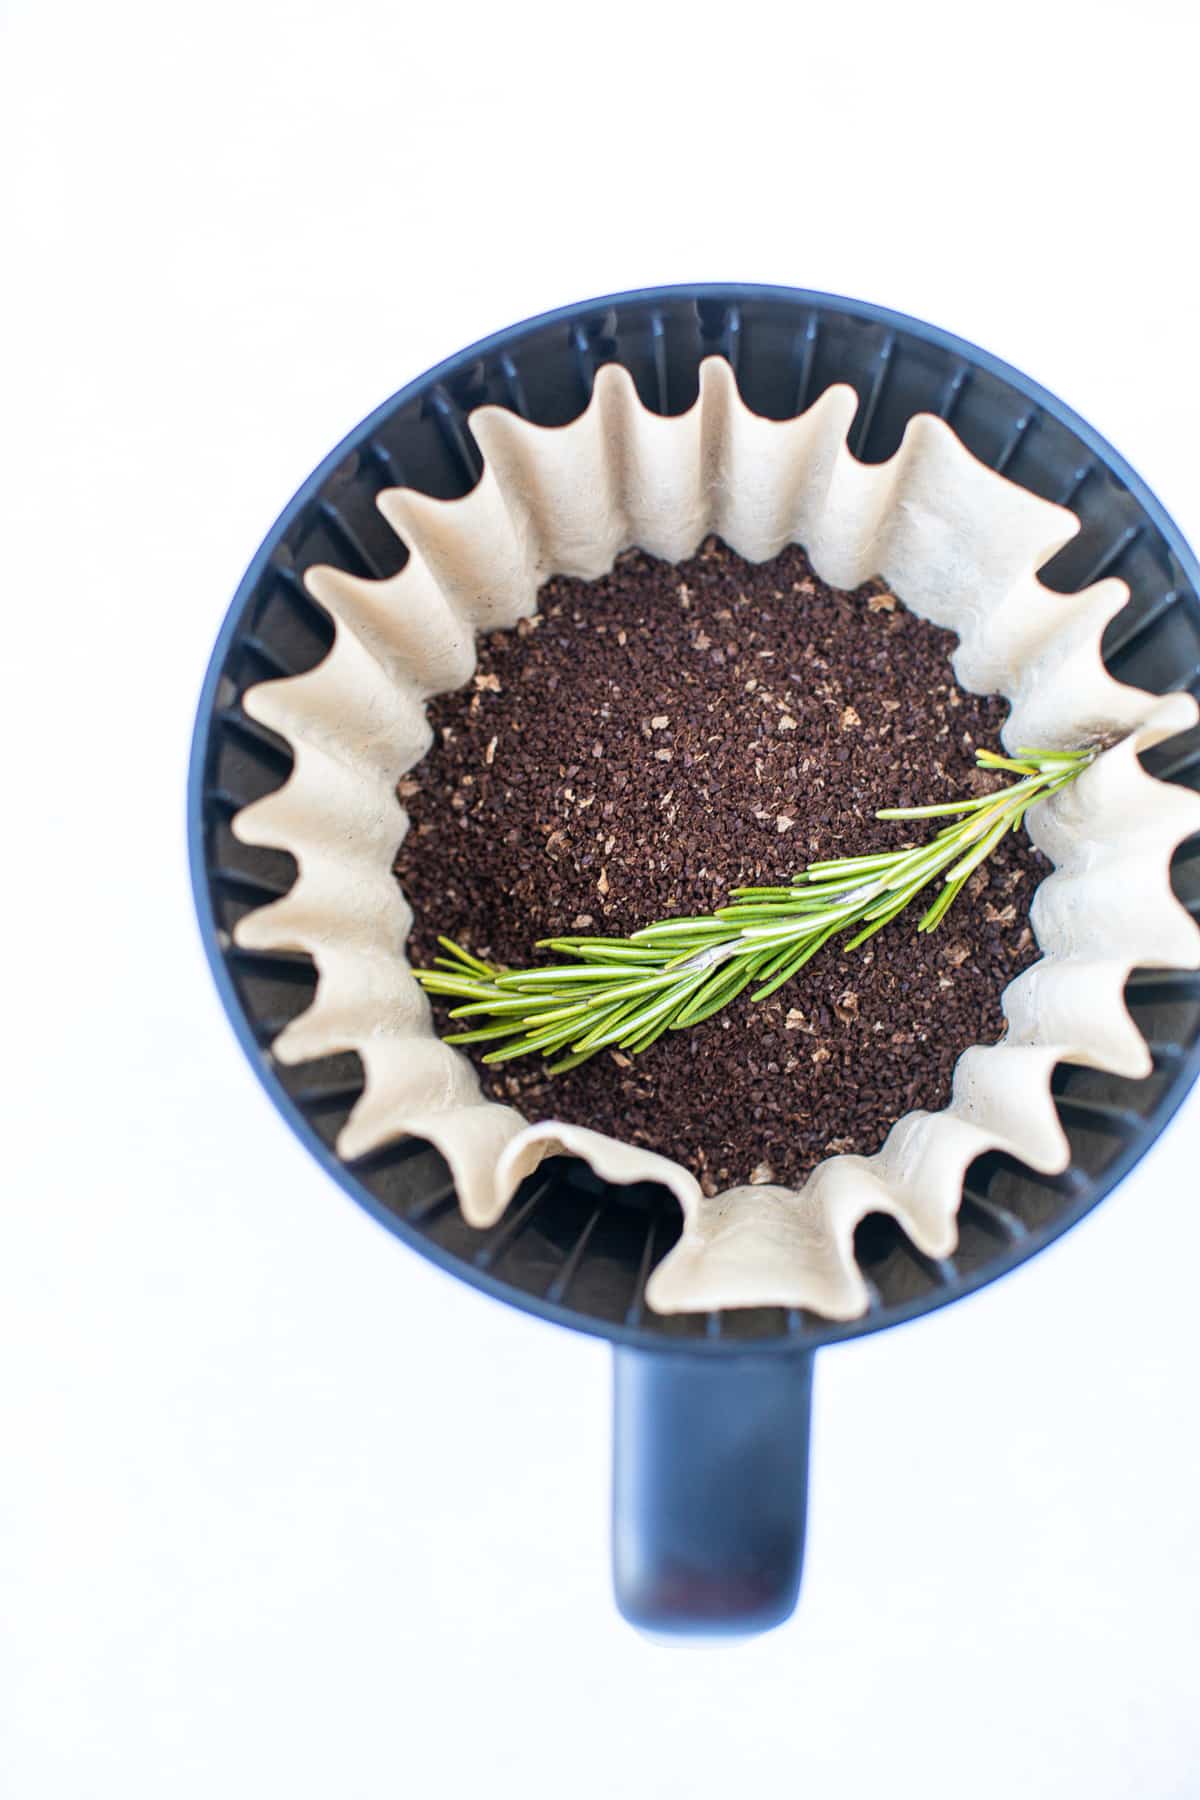 coffee filter with a sprig of fresh rosemary on top of coffee grounds